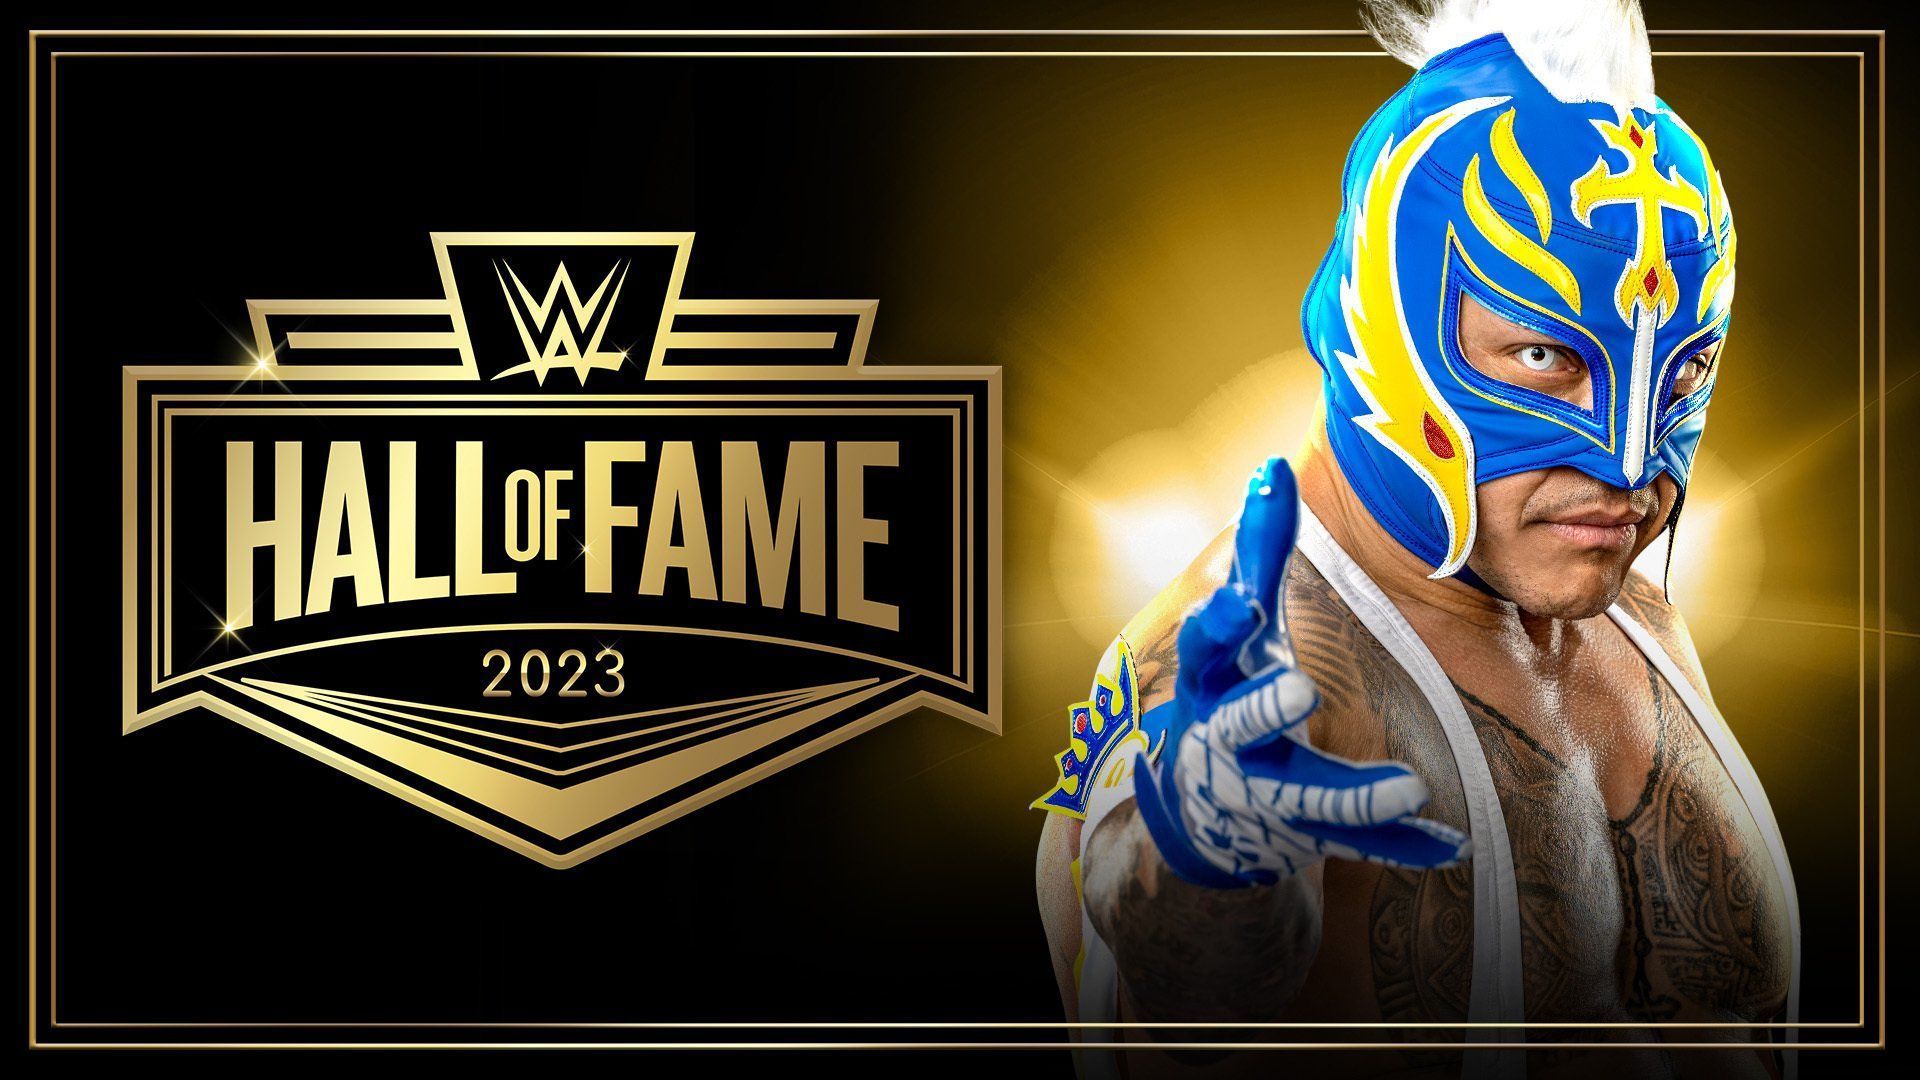 Rey Mysterio is being inducted into the Hall of Fame